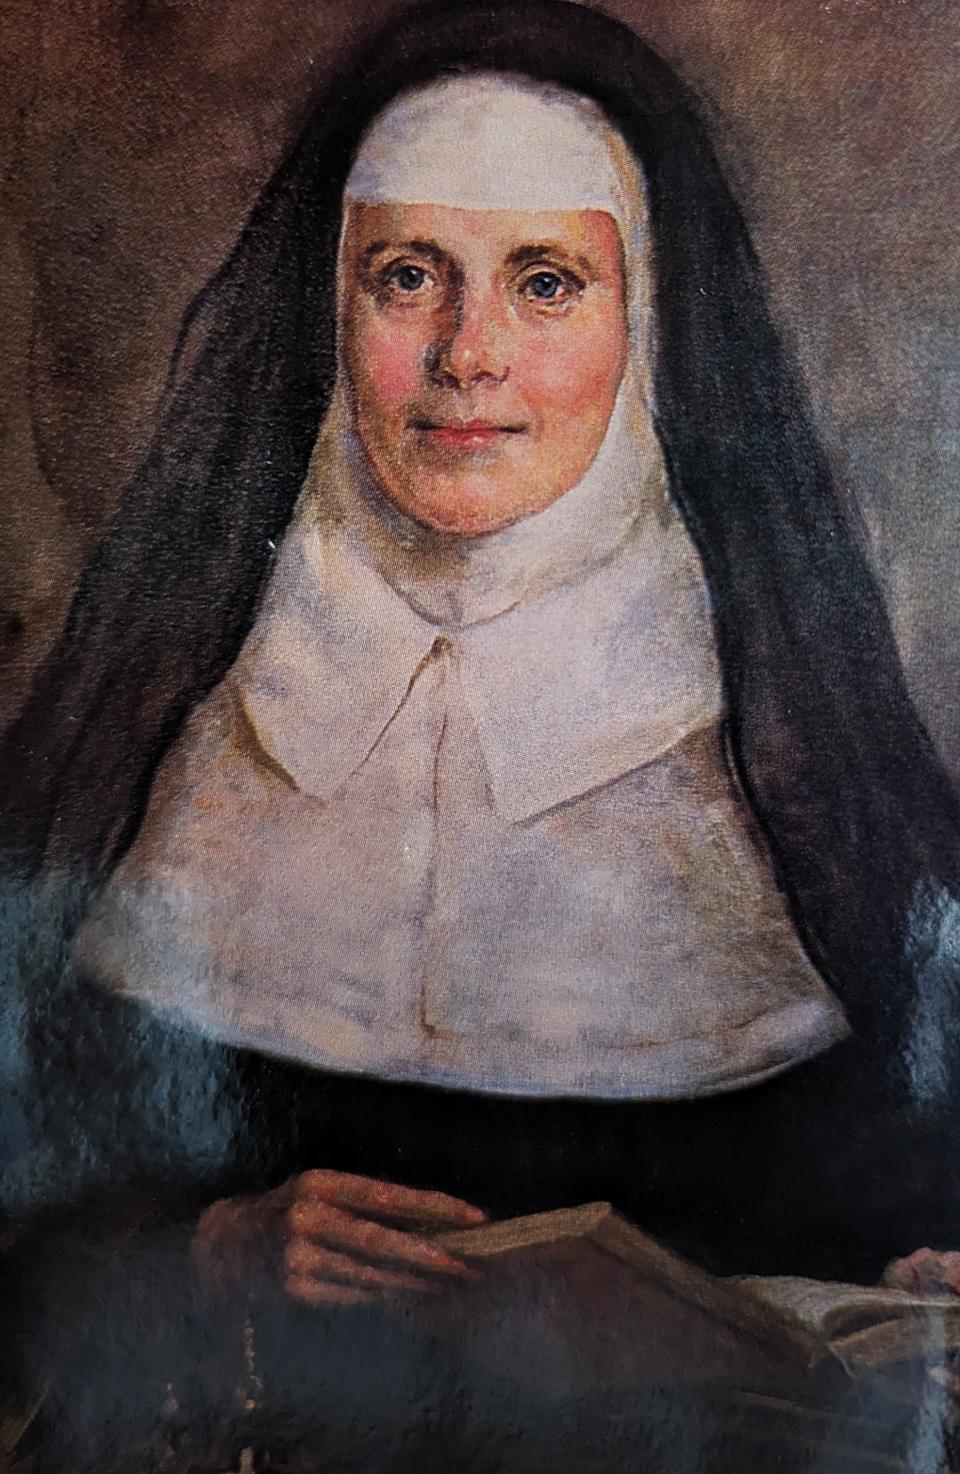 This portrait of Mother Catherine McAuley of Dublin, founder of the Sisters of Mercy, was painted by Iowa City artist Cloy Kent in 1981. Reproductions now appear worldwide in Mercy-affiliated facilities, with the original at Mercy Hospital Iowa City.